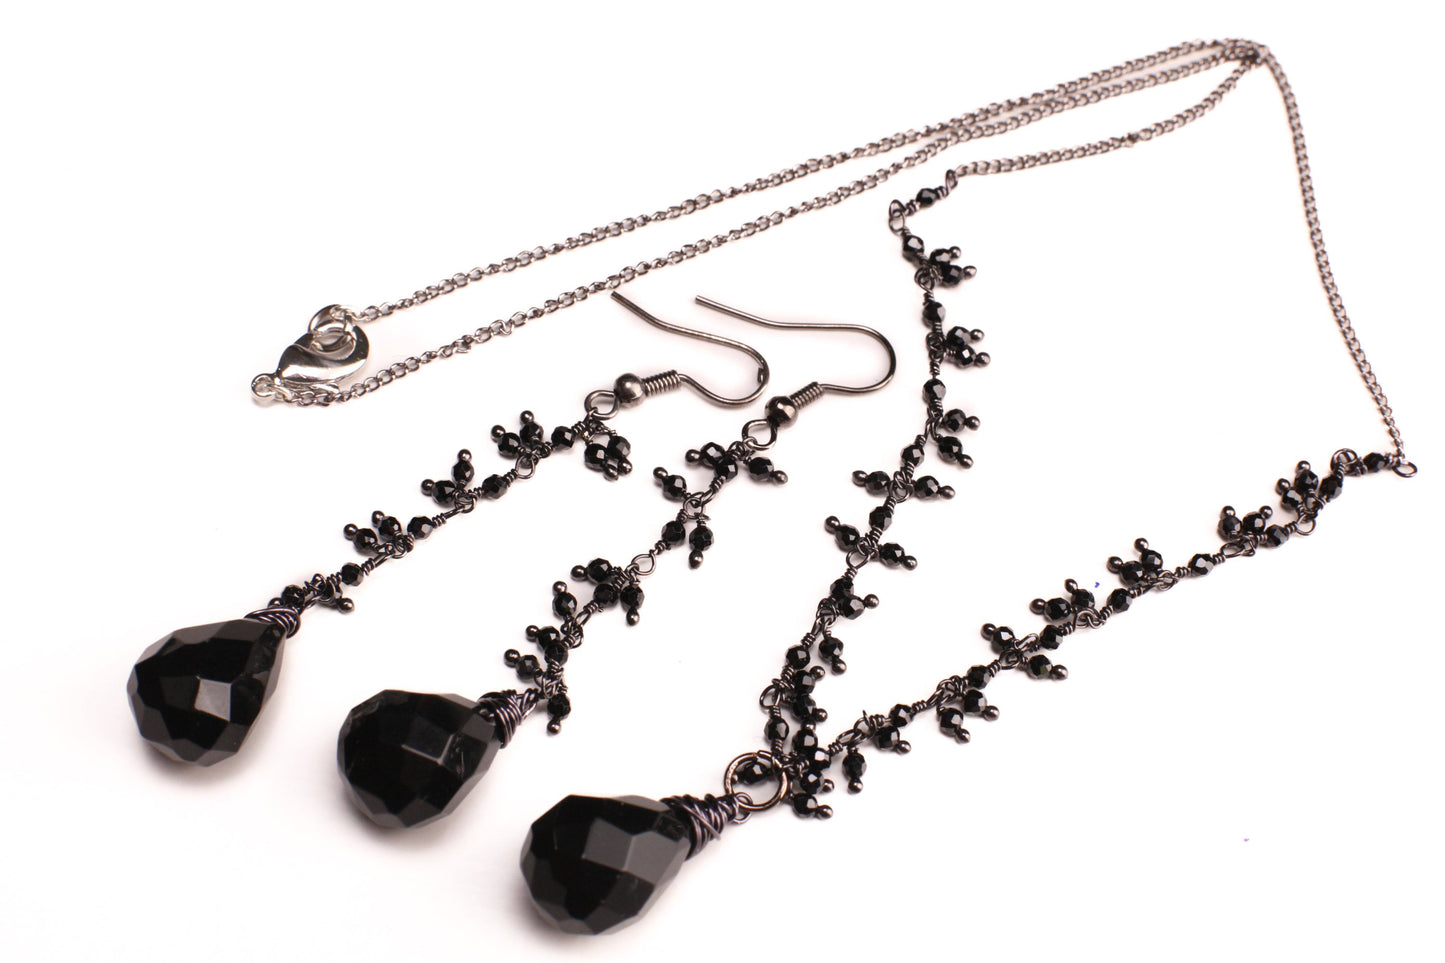 Black Onyx Teardrop Dangling with Black Spinel Clusters Wire Wrapped Necklace, Matching Earrings Jewelry Set Handmade Gift